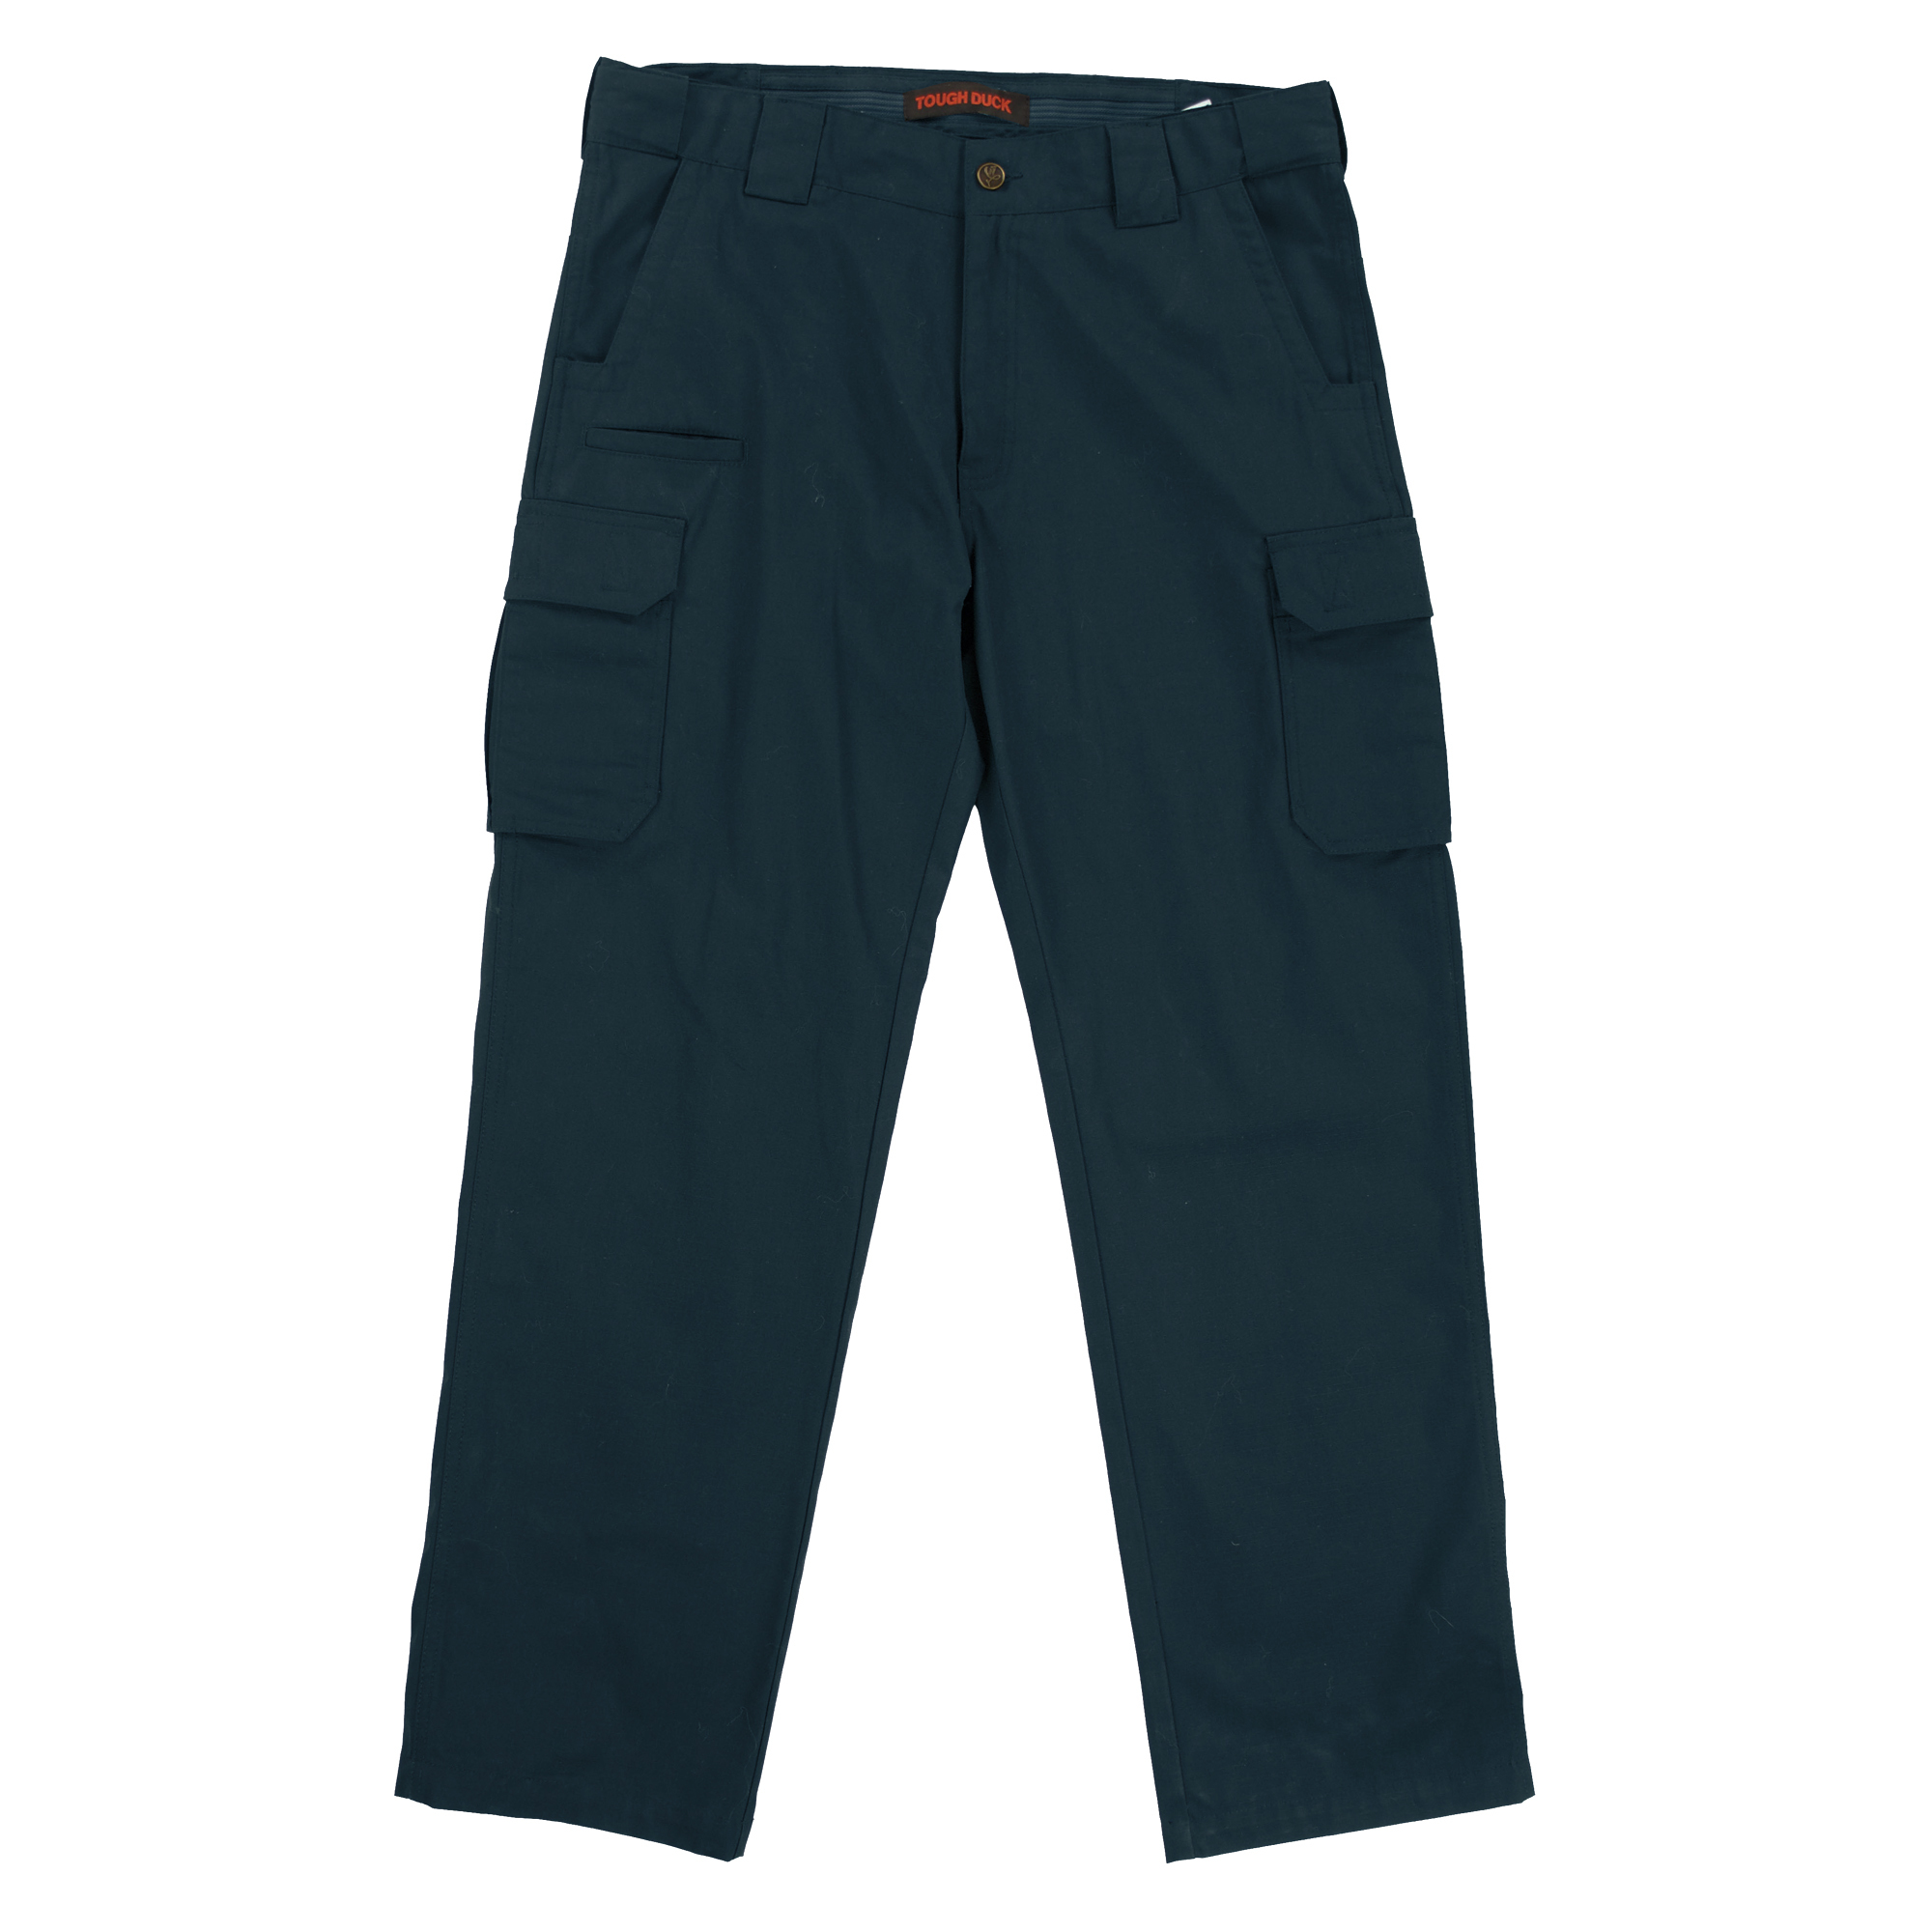 Tough Duck, Ripstop Cargo Pant, Waist 46 in, Inseam 32 in, Color Navy, Model WP111